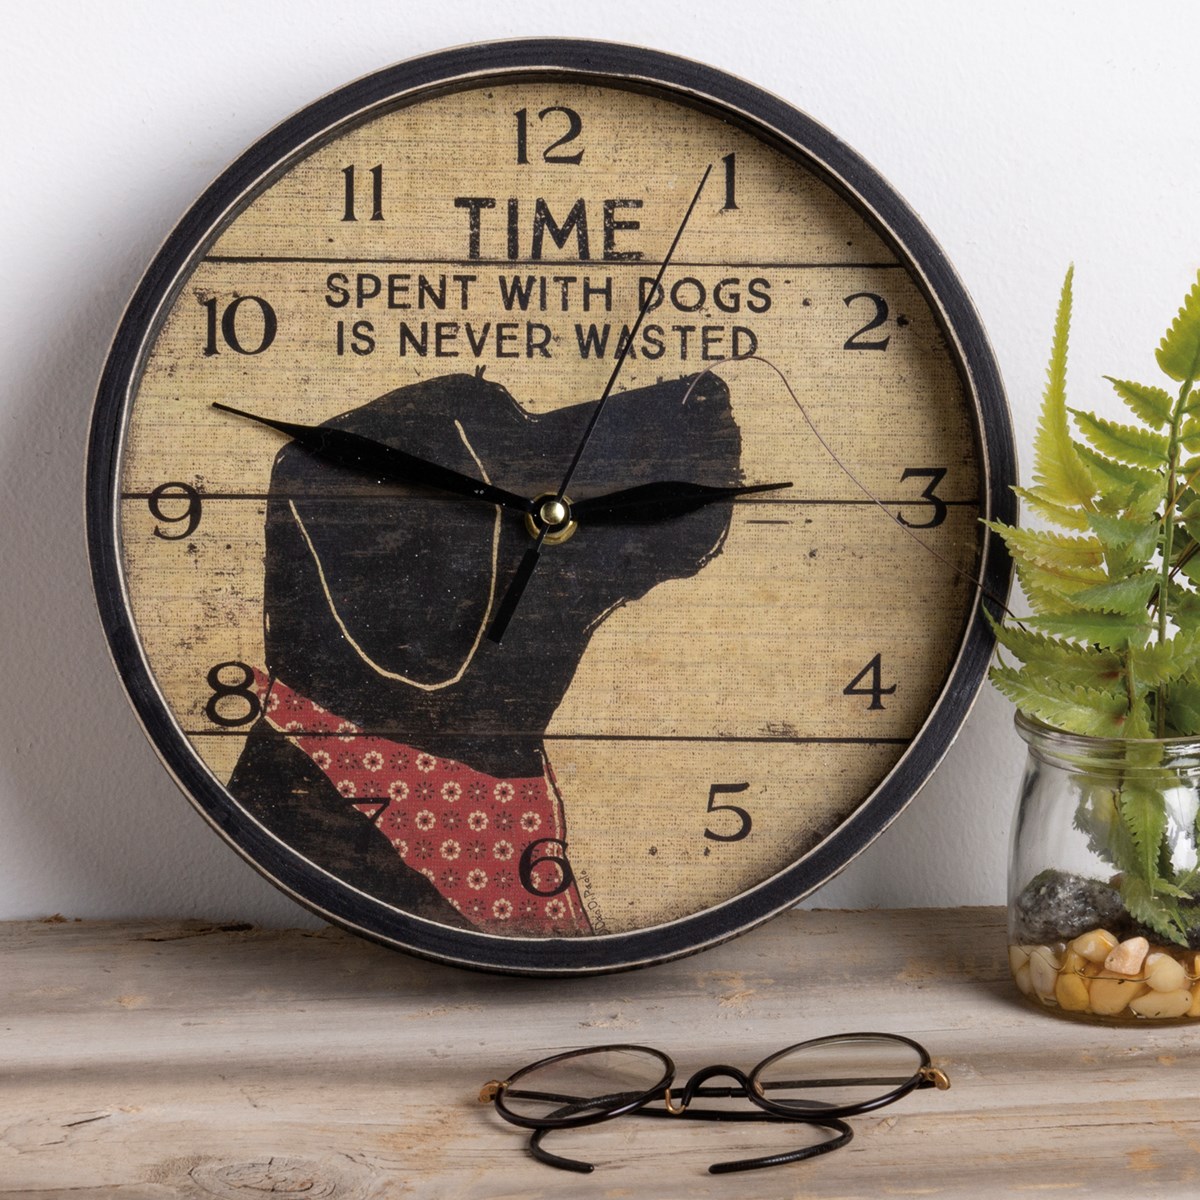 Clock - Time Spent With Dogs Is Never Wasted - 9.50" Diameter x 1.75" - Wood, Paper, Glass, Metal